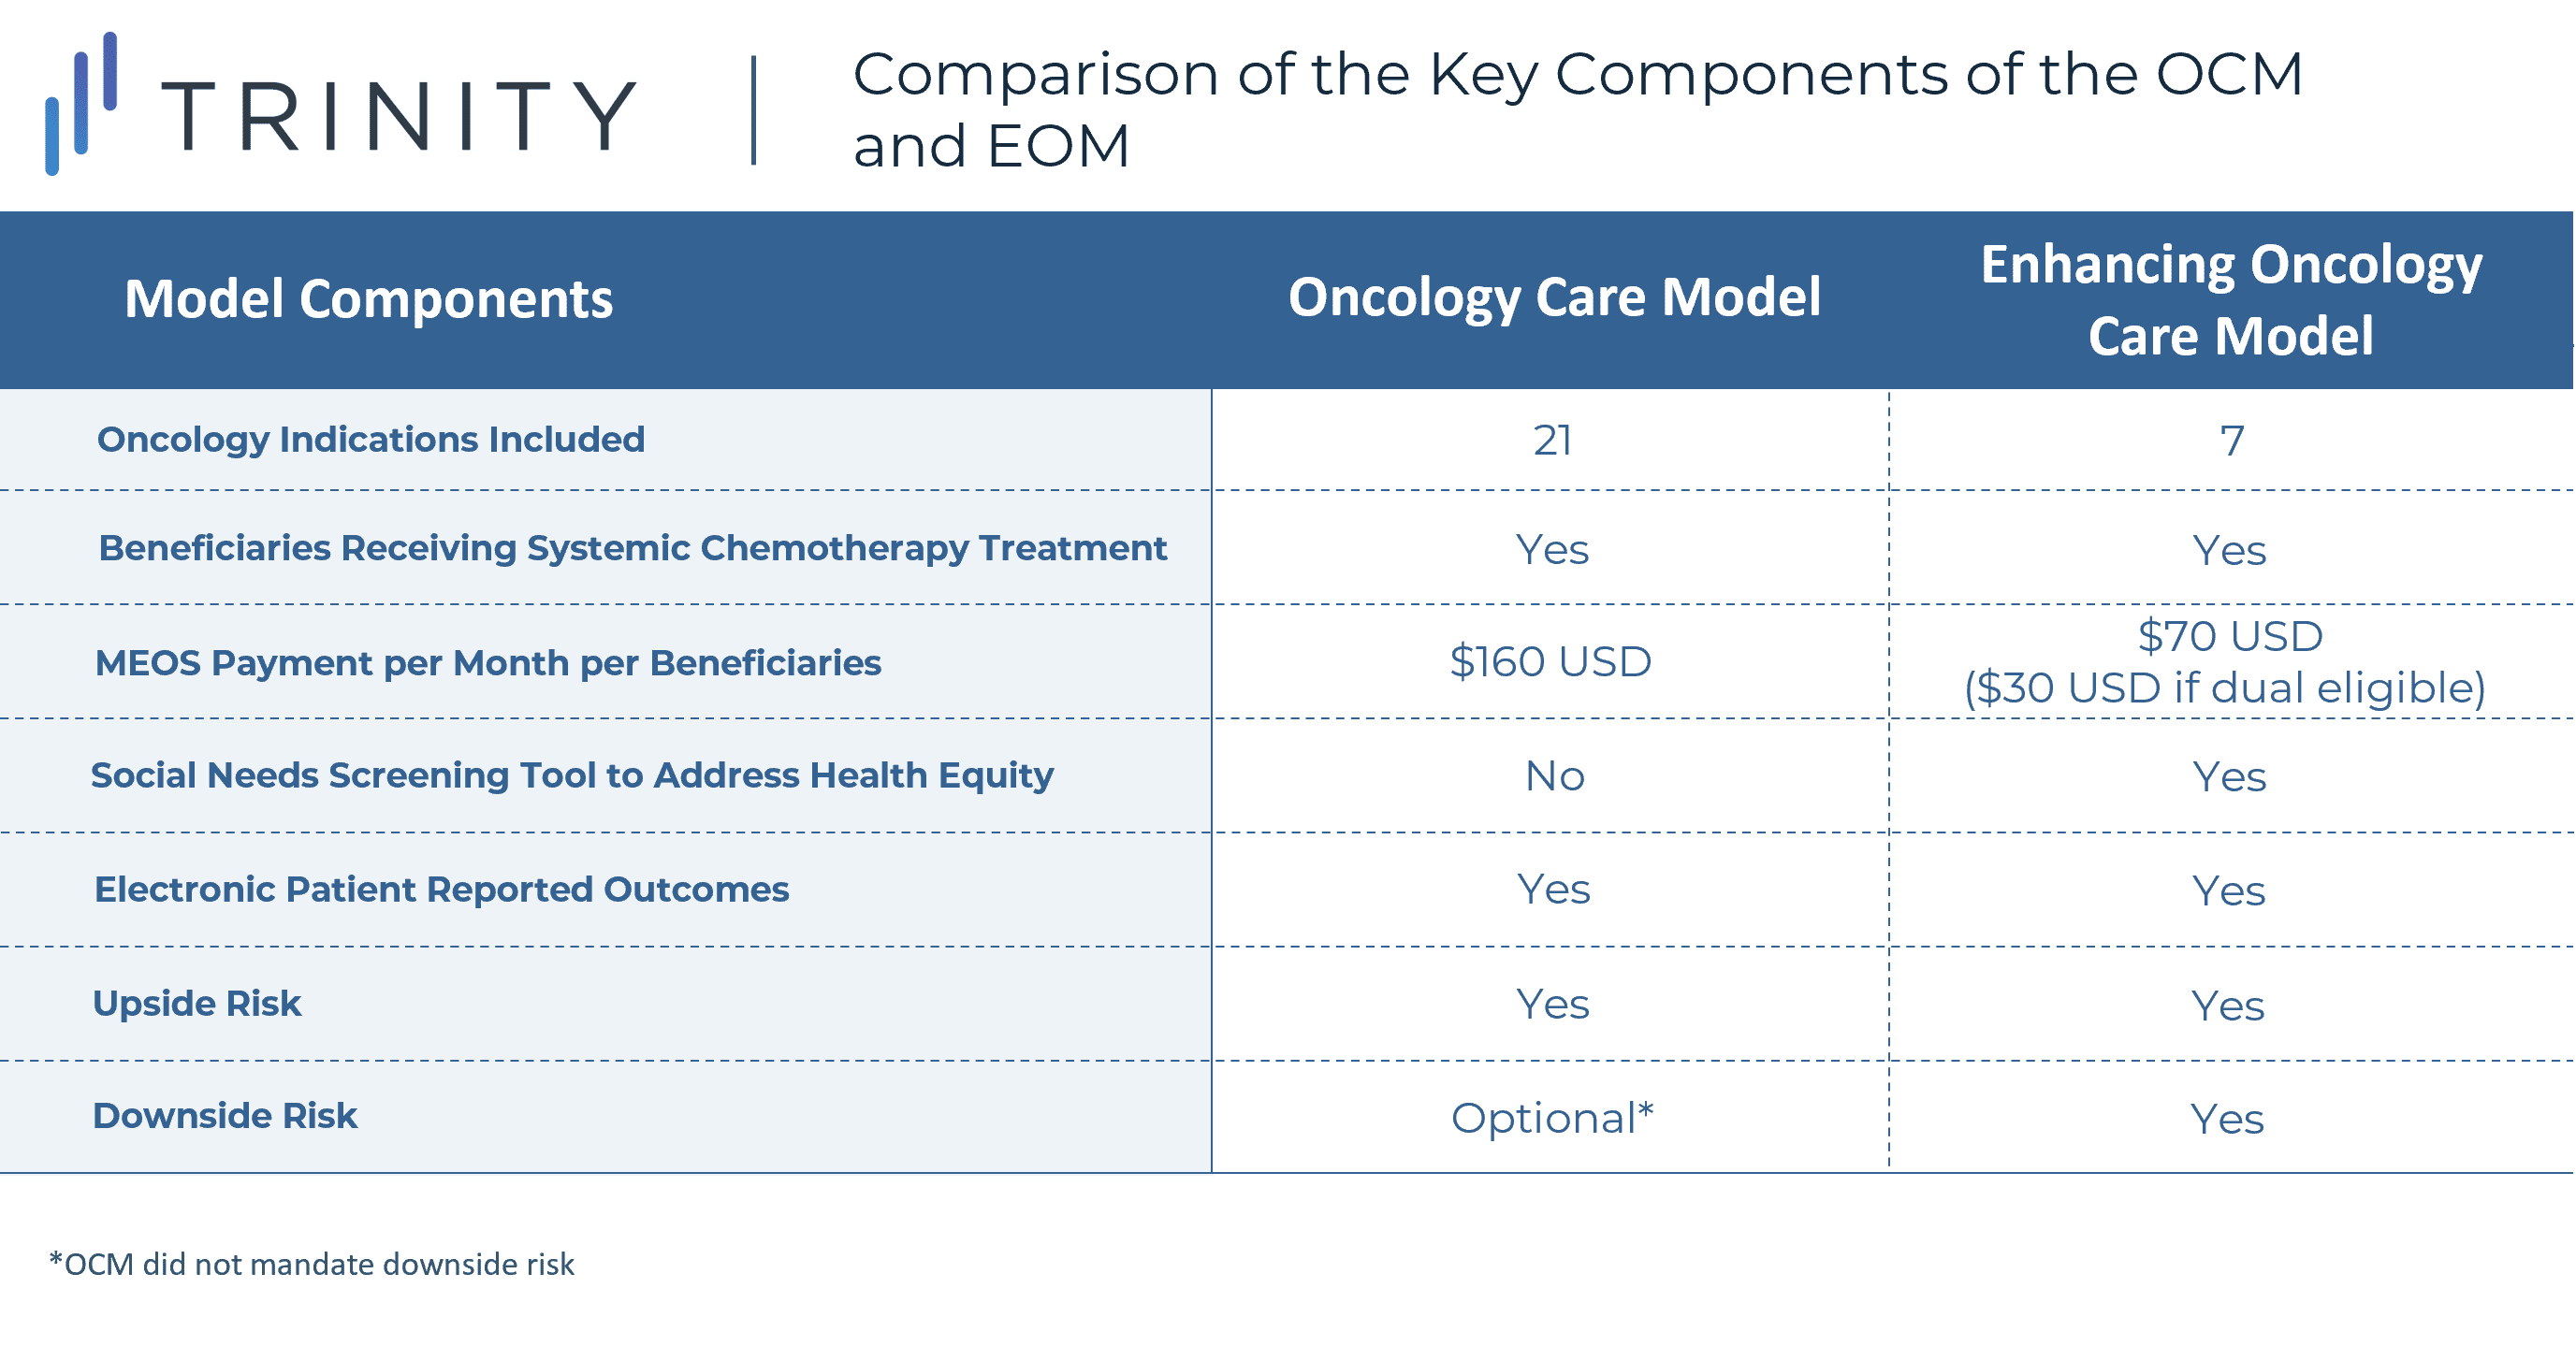 Table comparing 7 key components of OCM & EOM. Fewer oncology indications are included in the EOM.